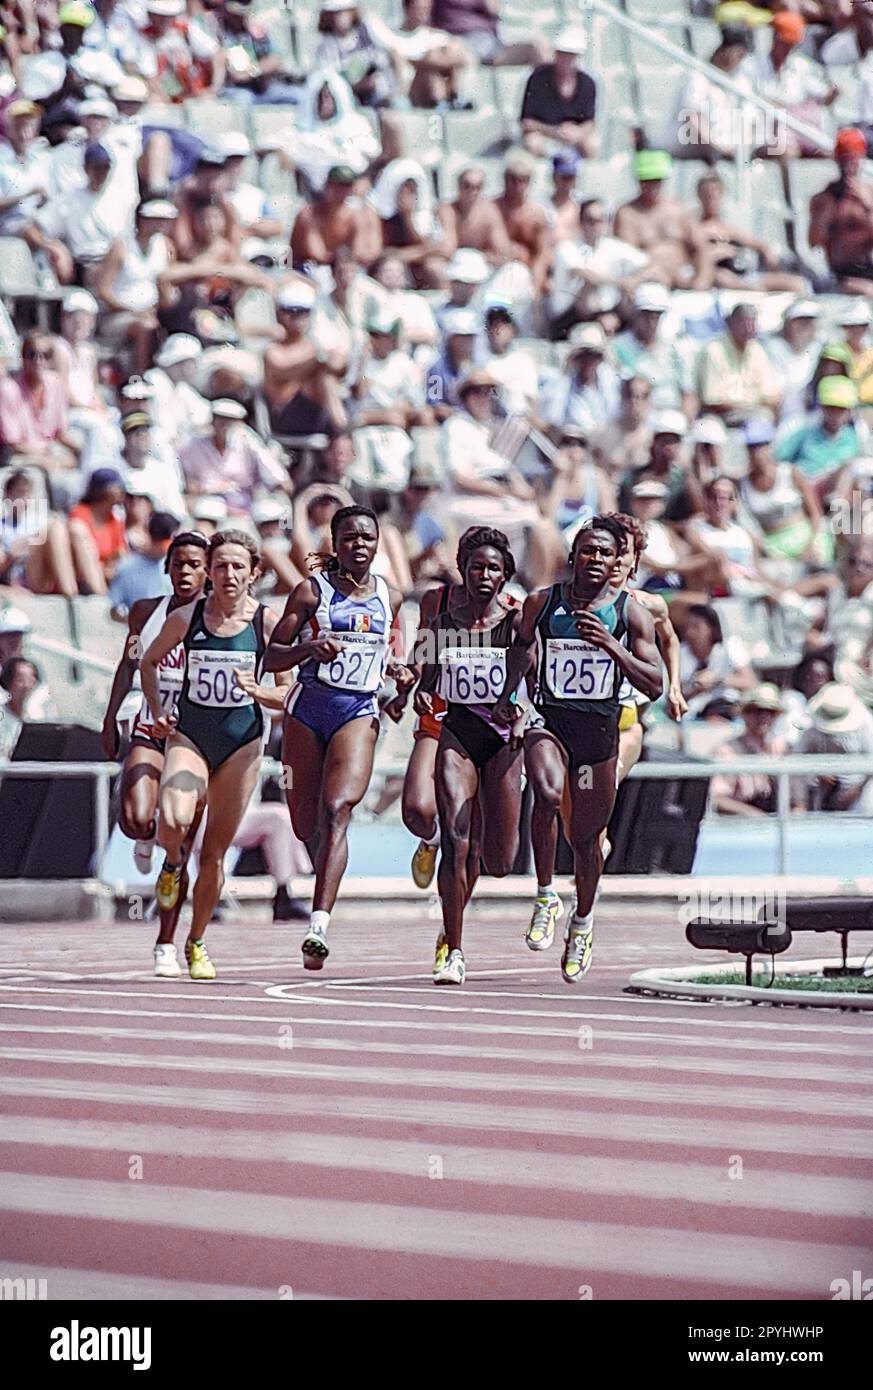 Maria Mutola (MOZ) #1257, Viviane Dorsile (FRA) #627, Lyubov Gurina (EUN) #508 in the first round heat of the Women's 800 meters at the 1992 Olympic Summer Games. Stock Photo